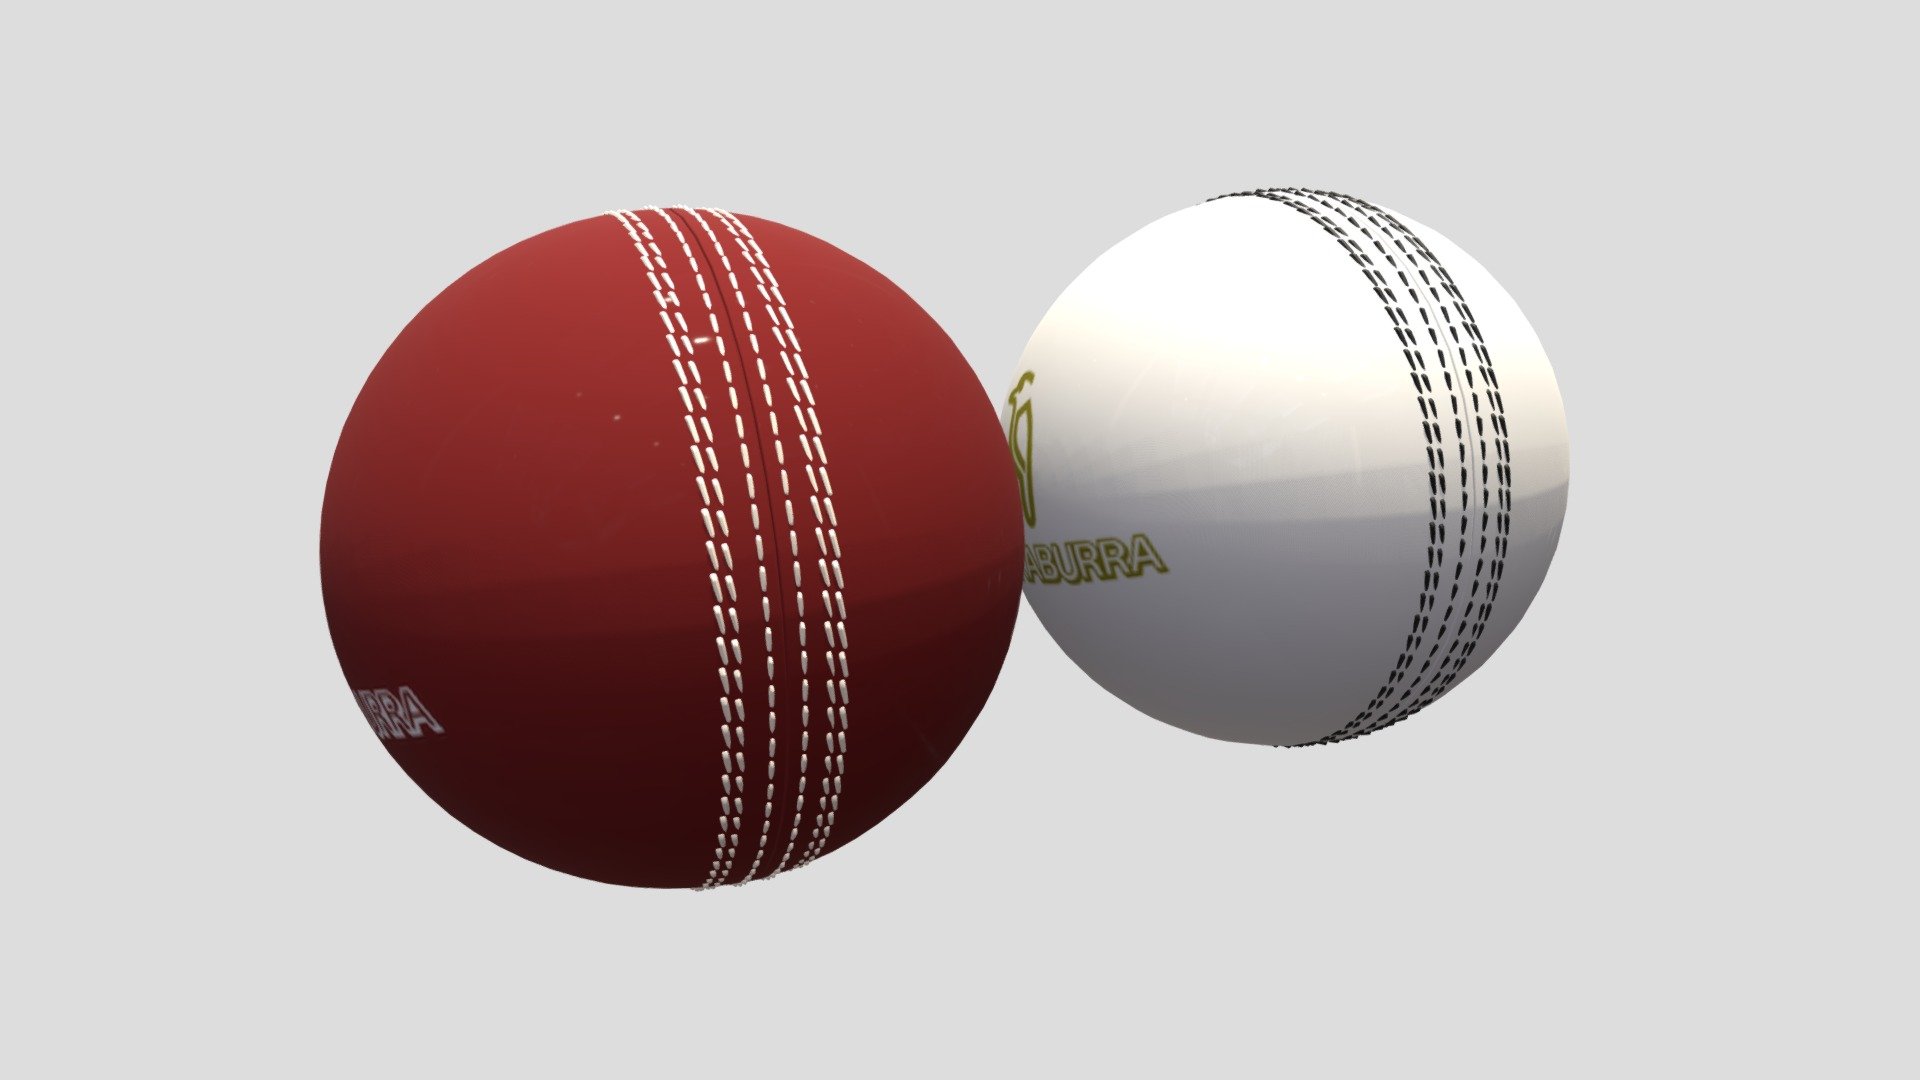 Cricket Ball 3D model is a high quality, photo real model that will enhance detail and realism to any of your game projects or commercials. The model has a fully textured, detailed design that allows for close-up renders 3d model